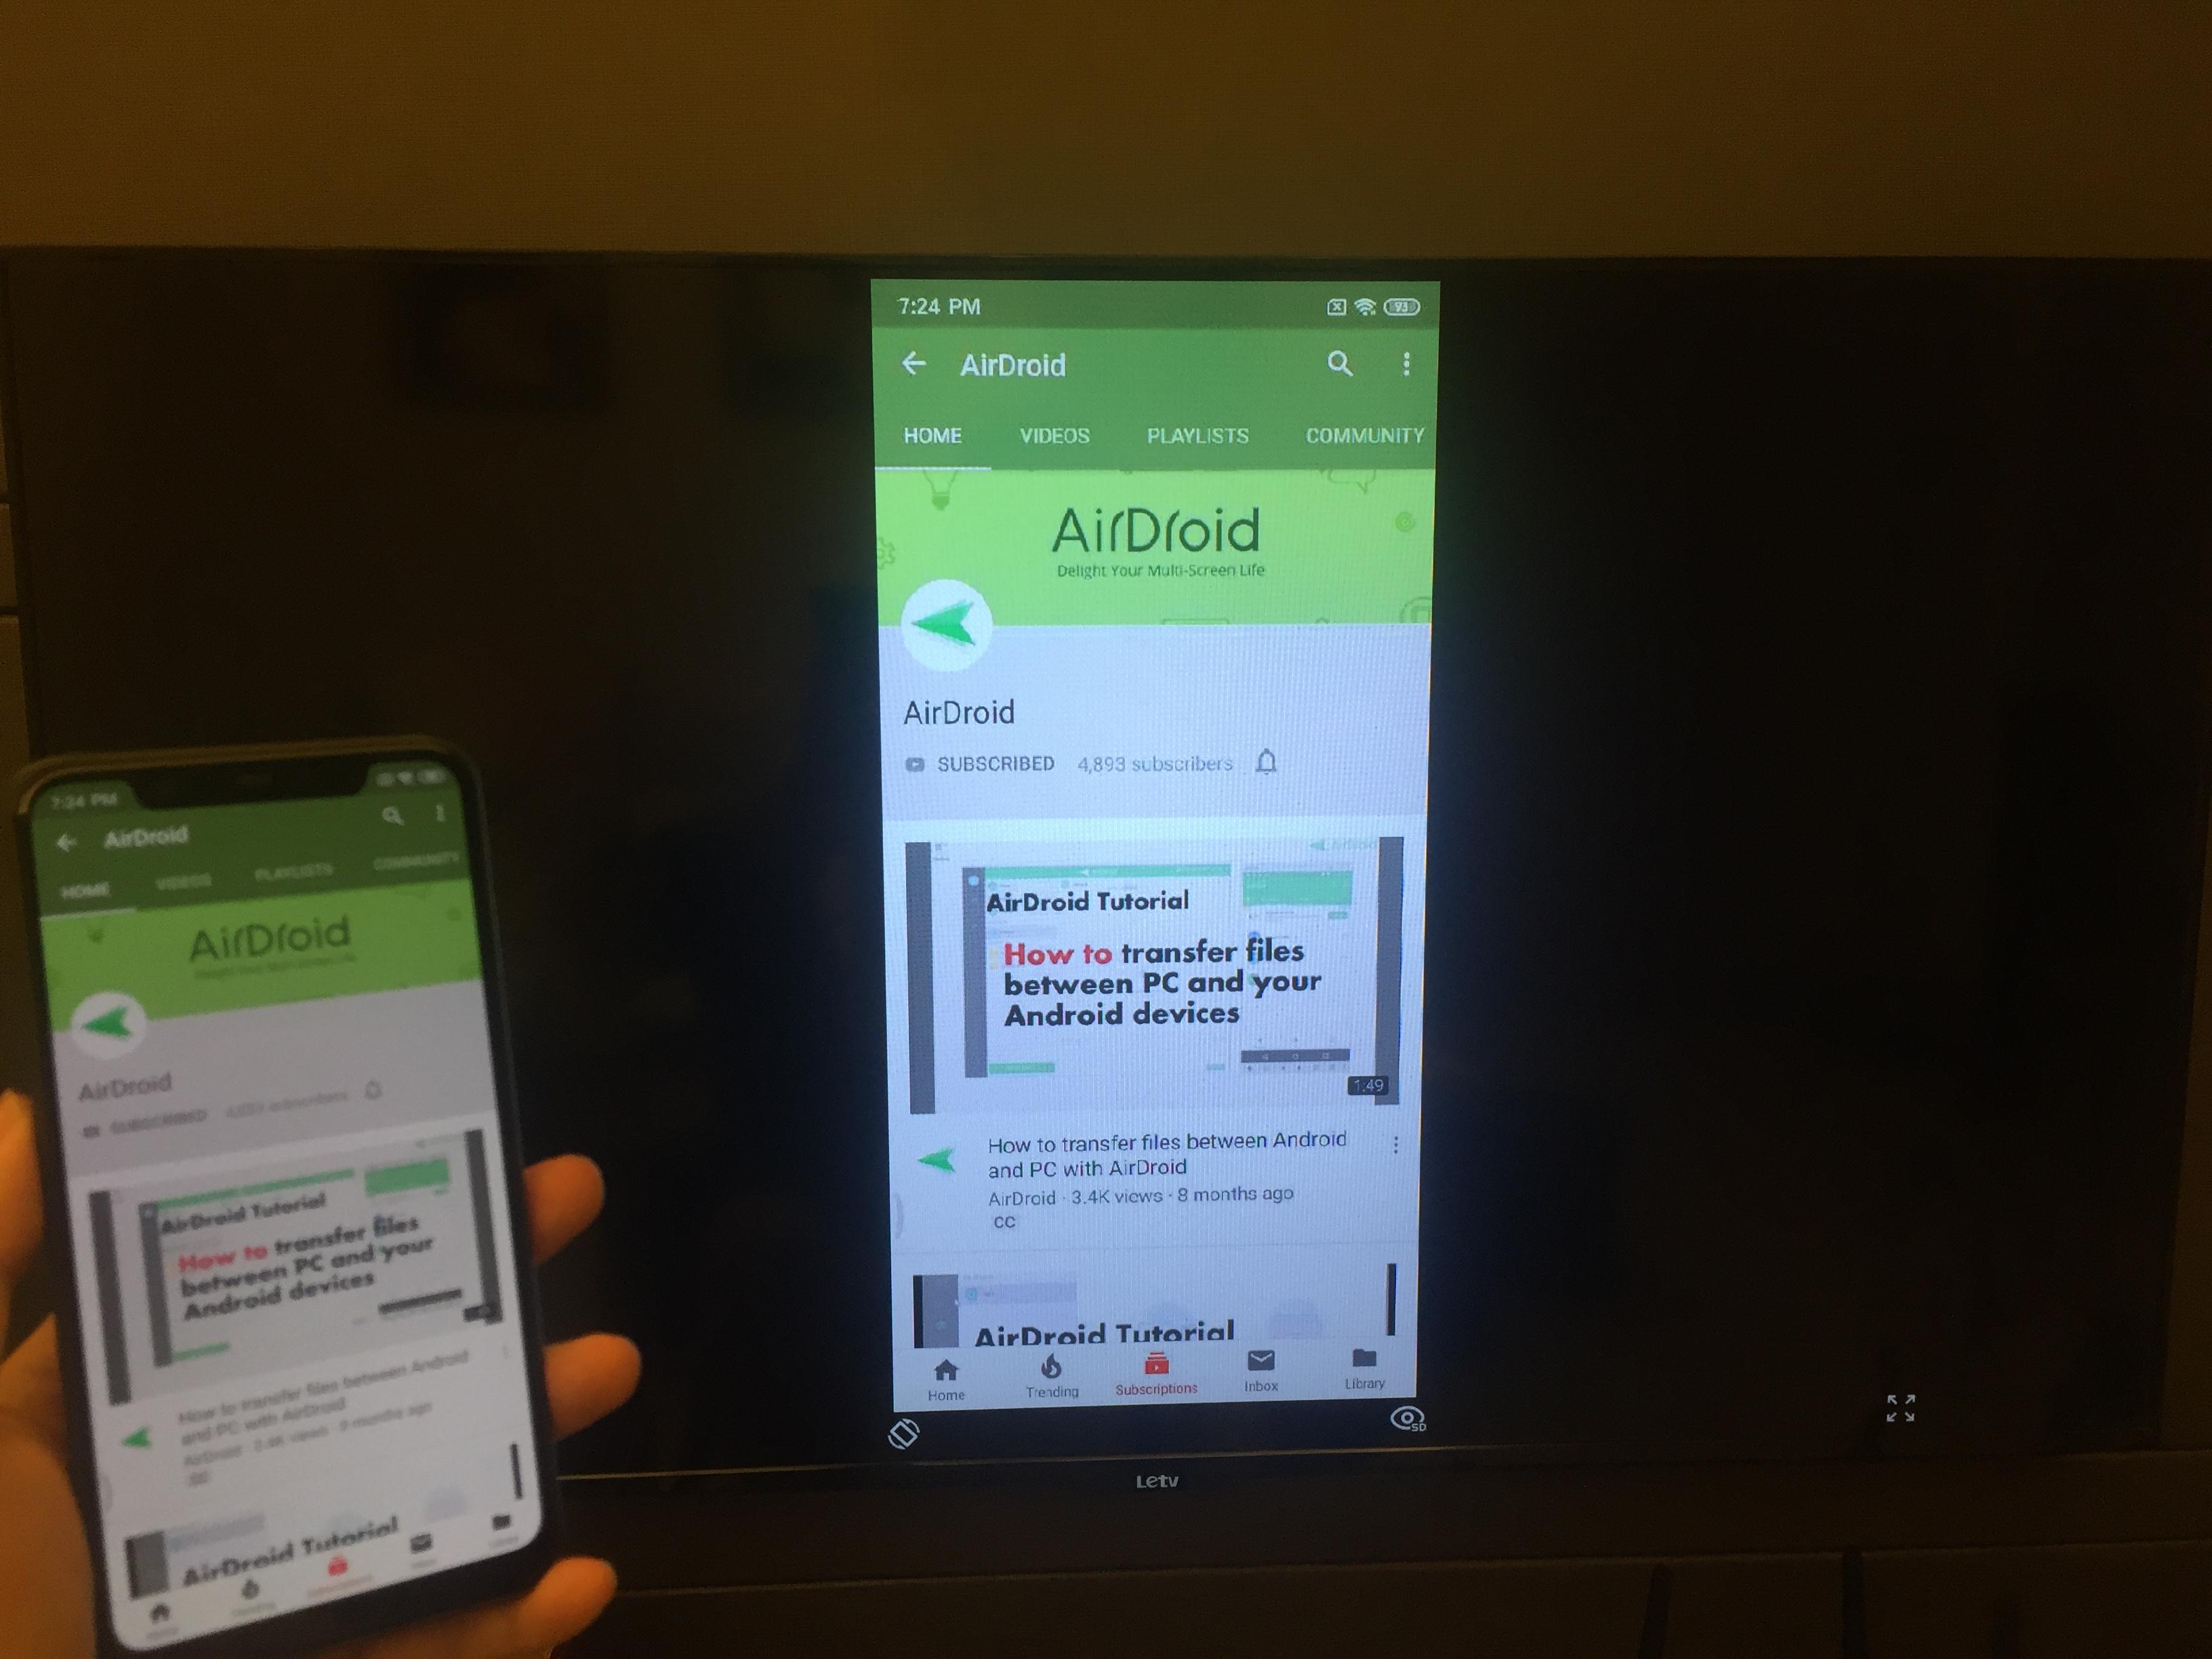 airdroid remote support